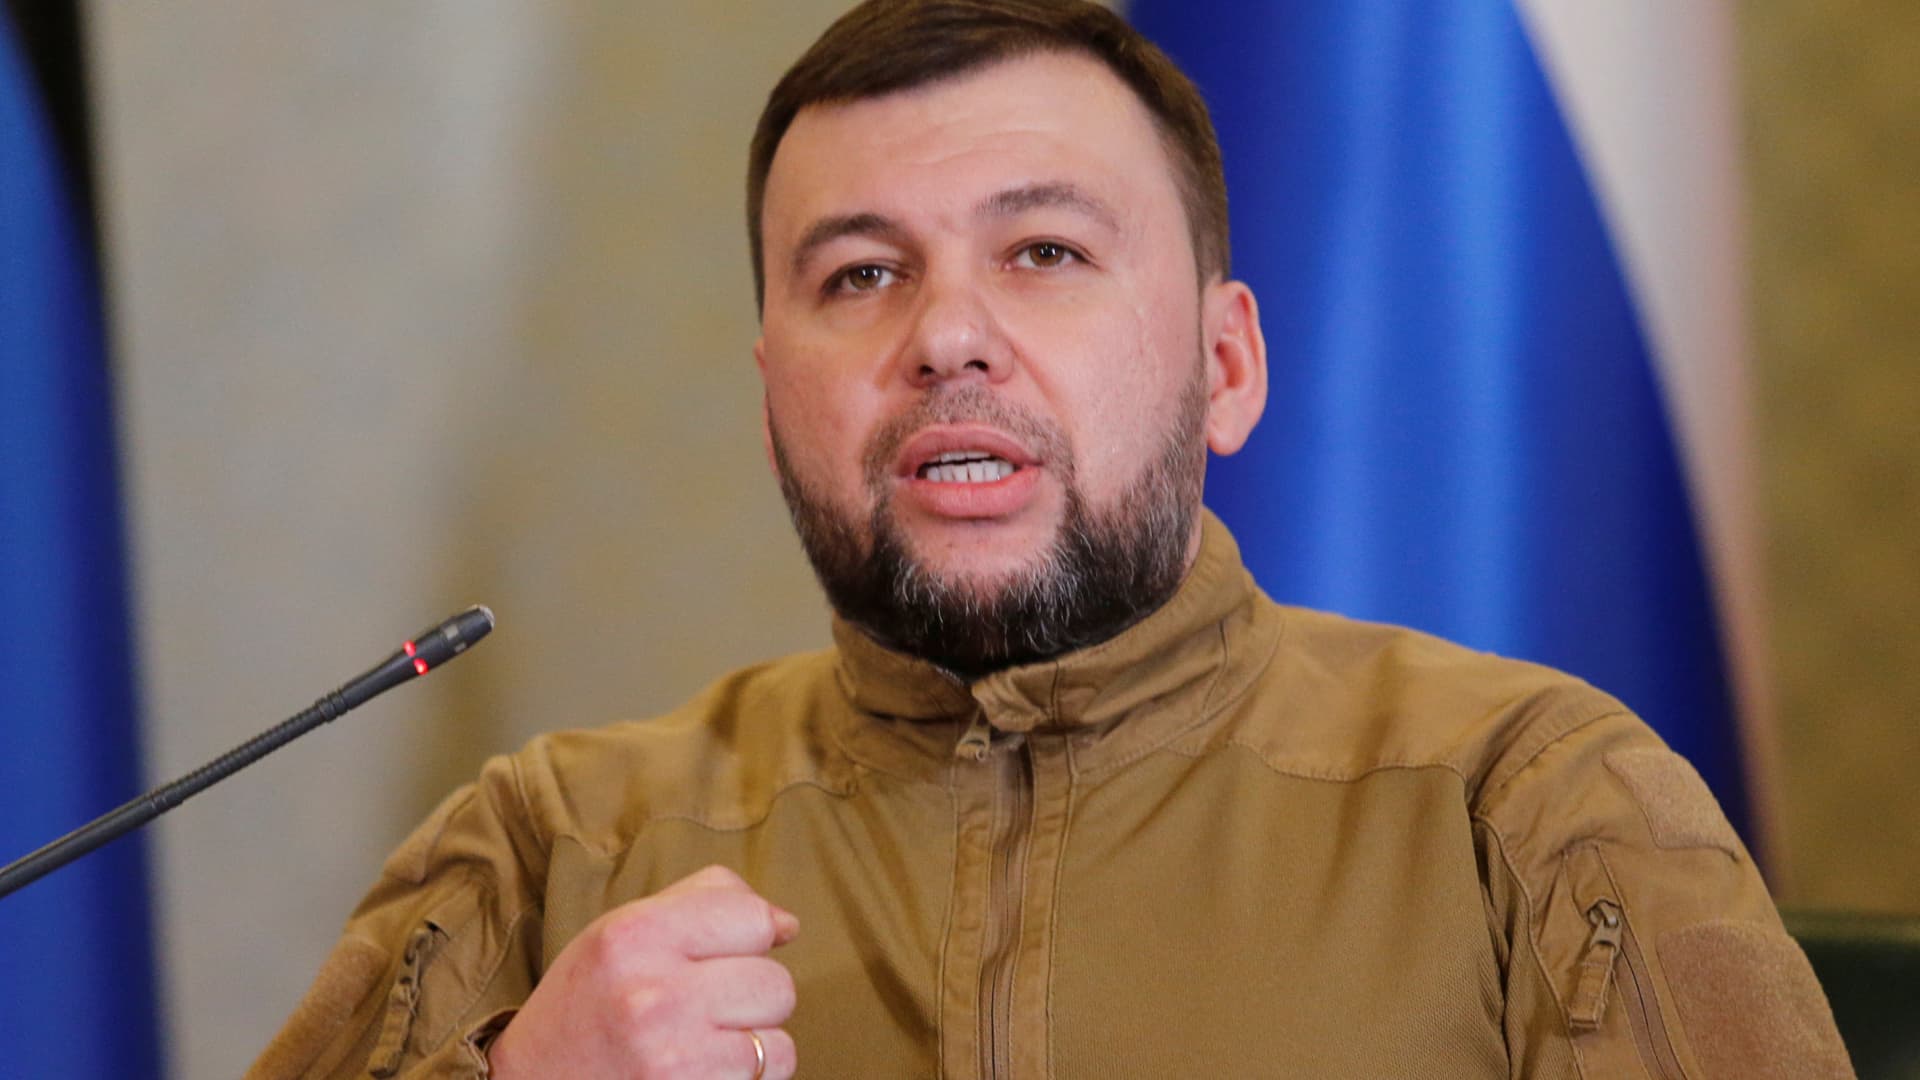 Denis Pushilin, head of the self-proclaimed Donetsk People's Republic, has reportedly pledged to increase cooperation with North Korea.